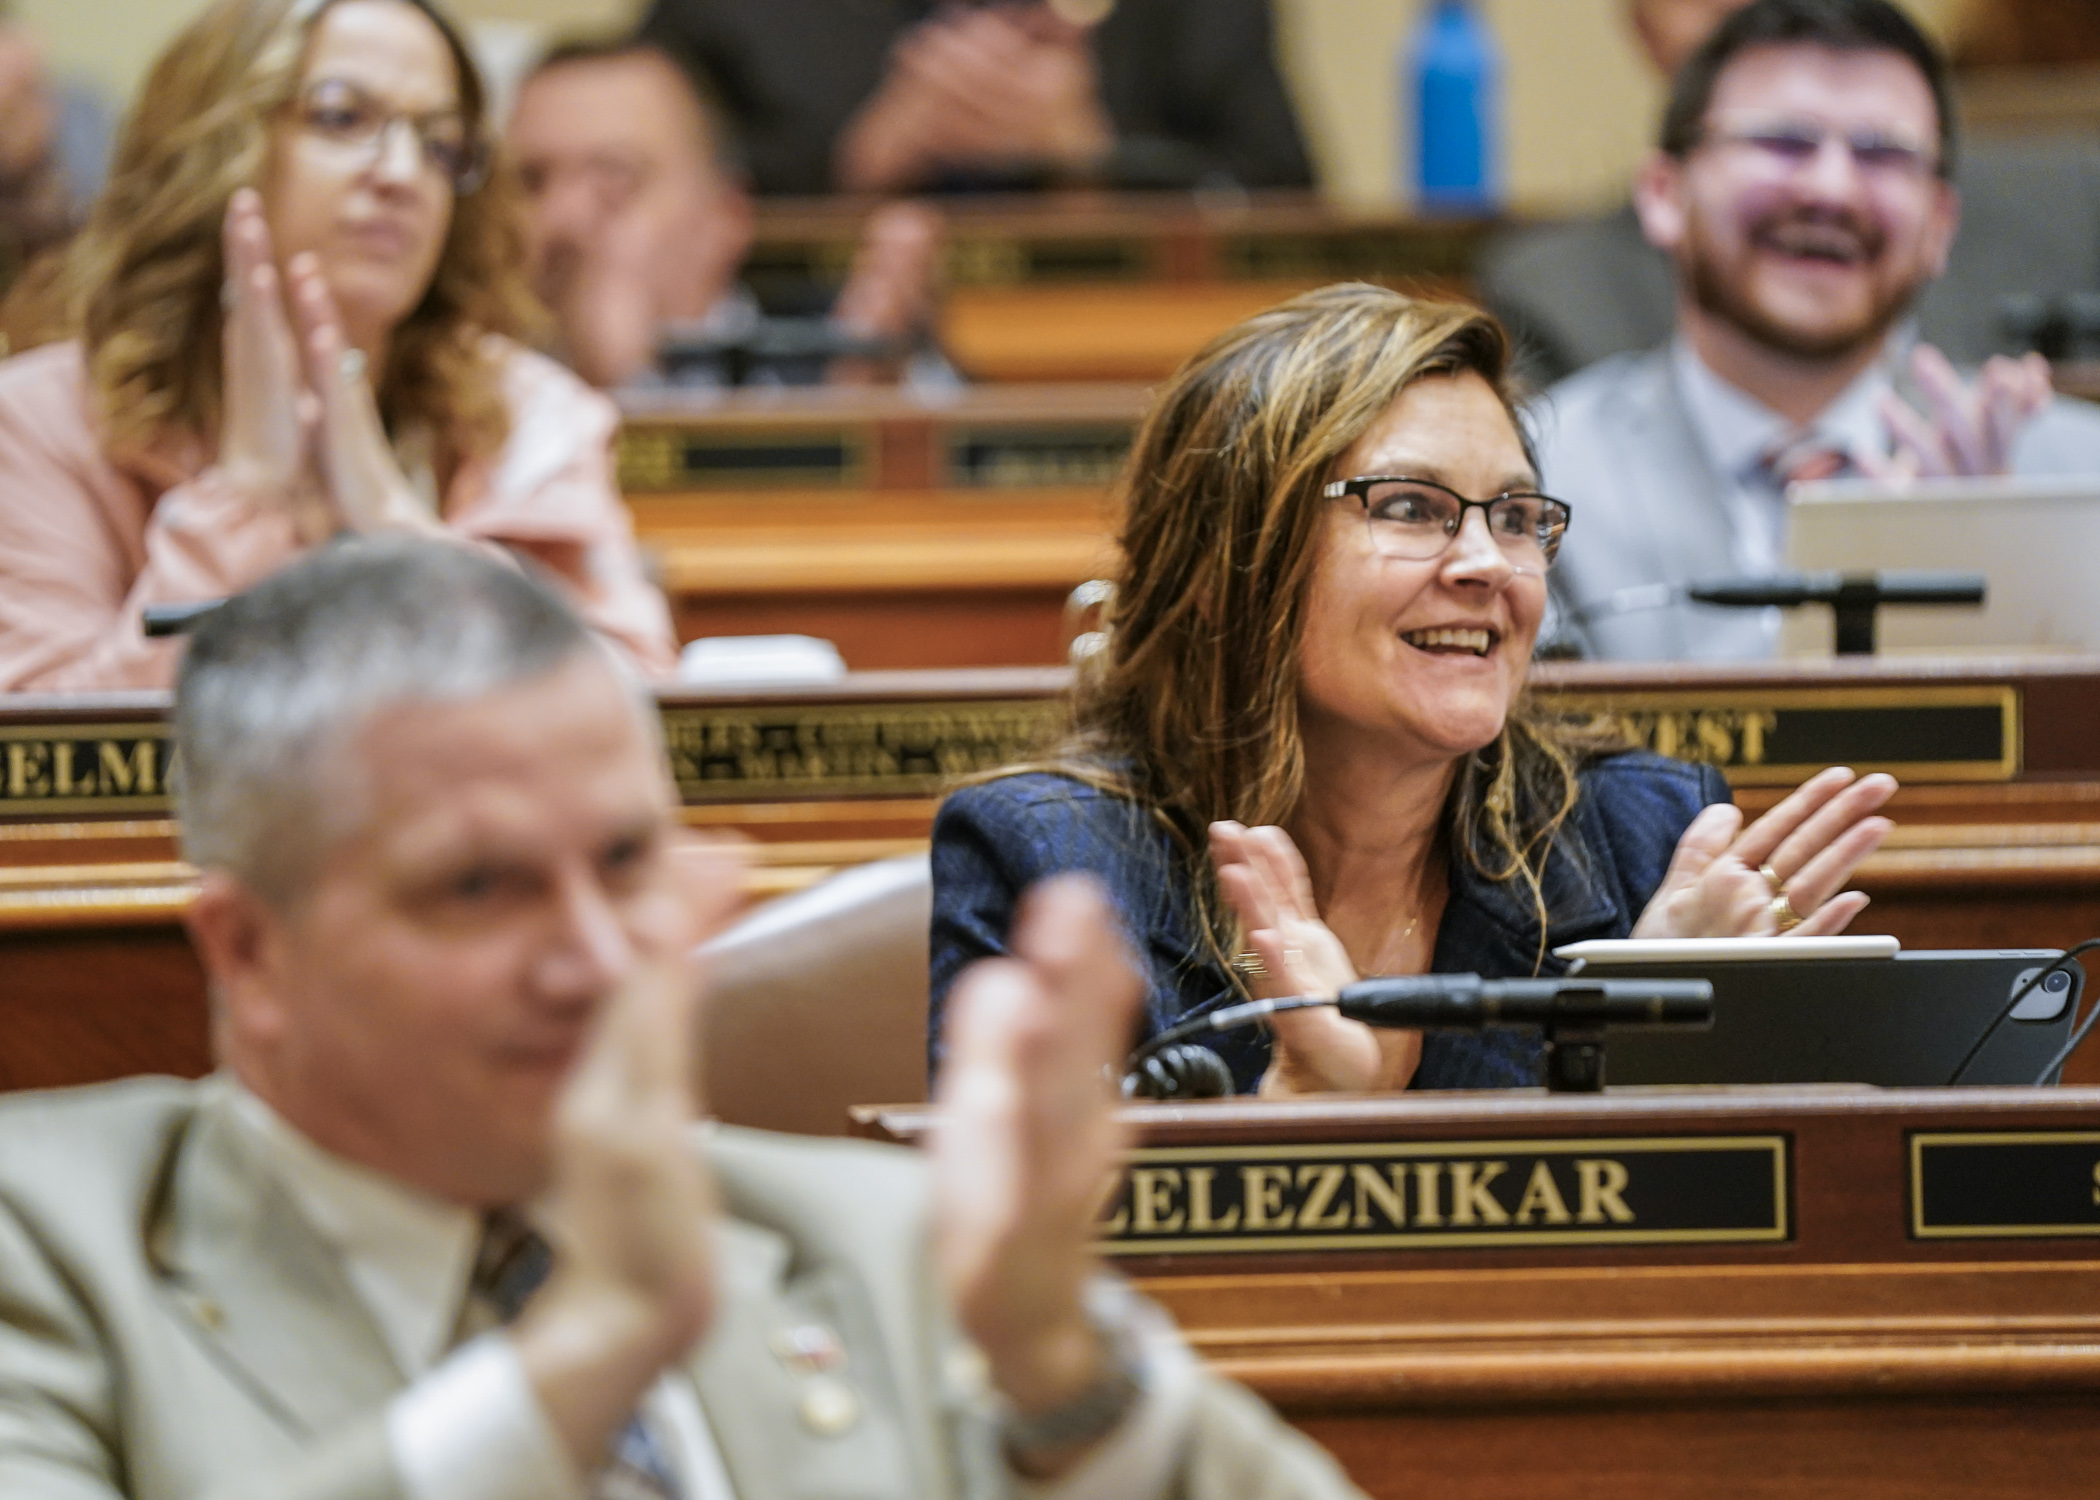 Rep. Natalie Zeleznikar and other House members applaud following the passage of HF3342, a bill to support nursing home facilities. (Photo by Catherine Davis)